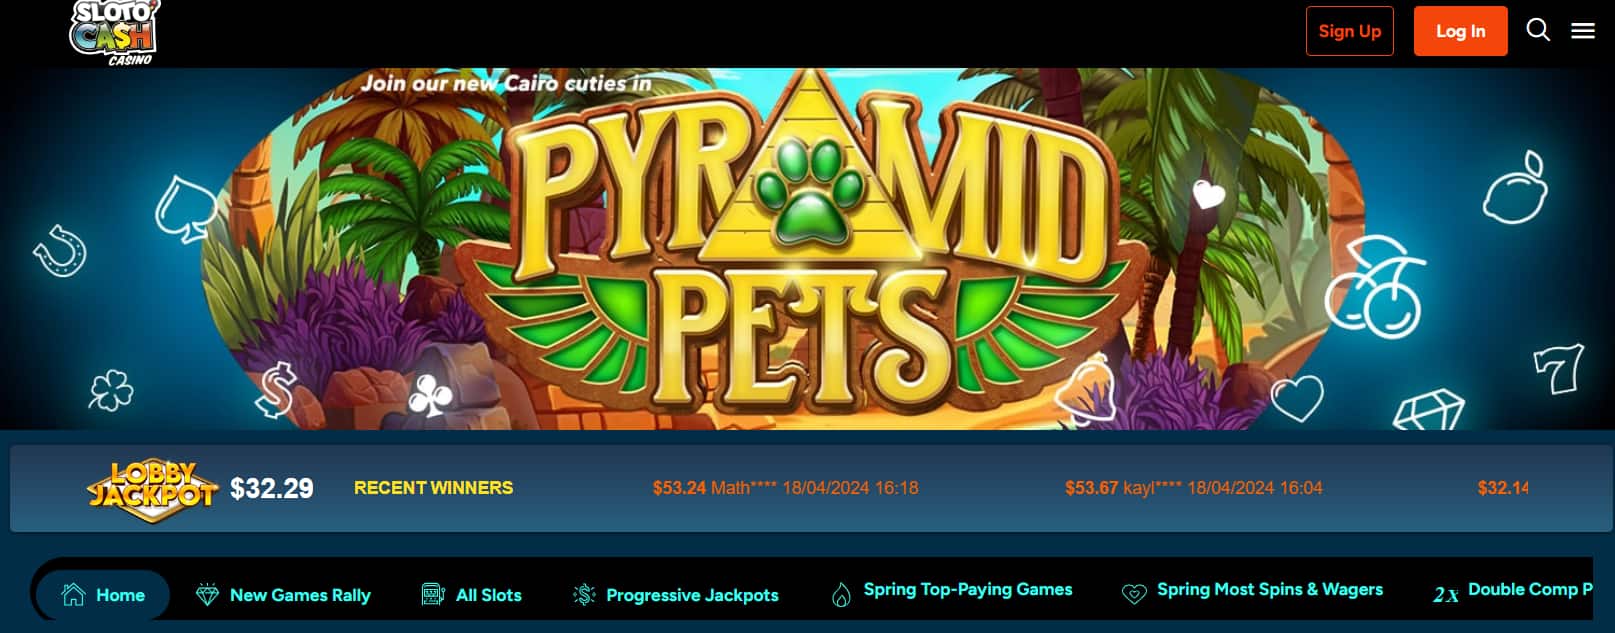 slotocash casino page list of games